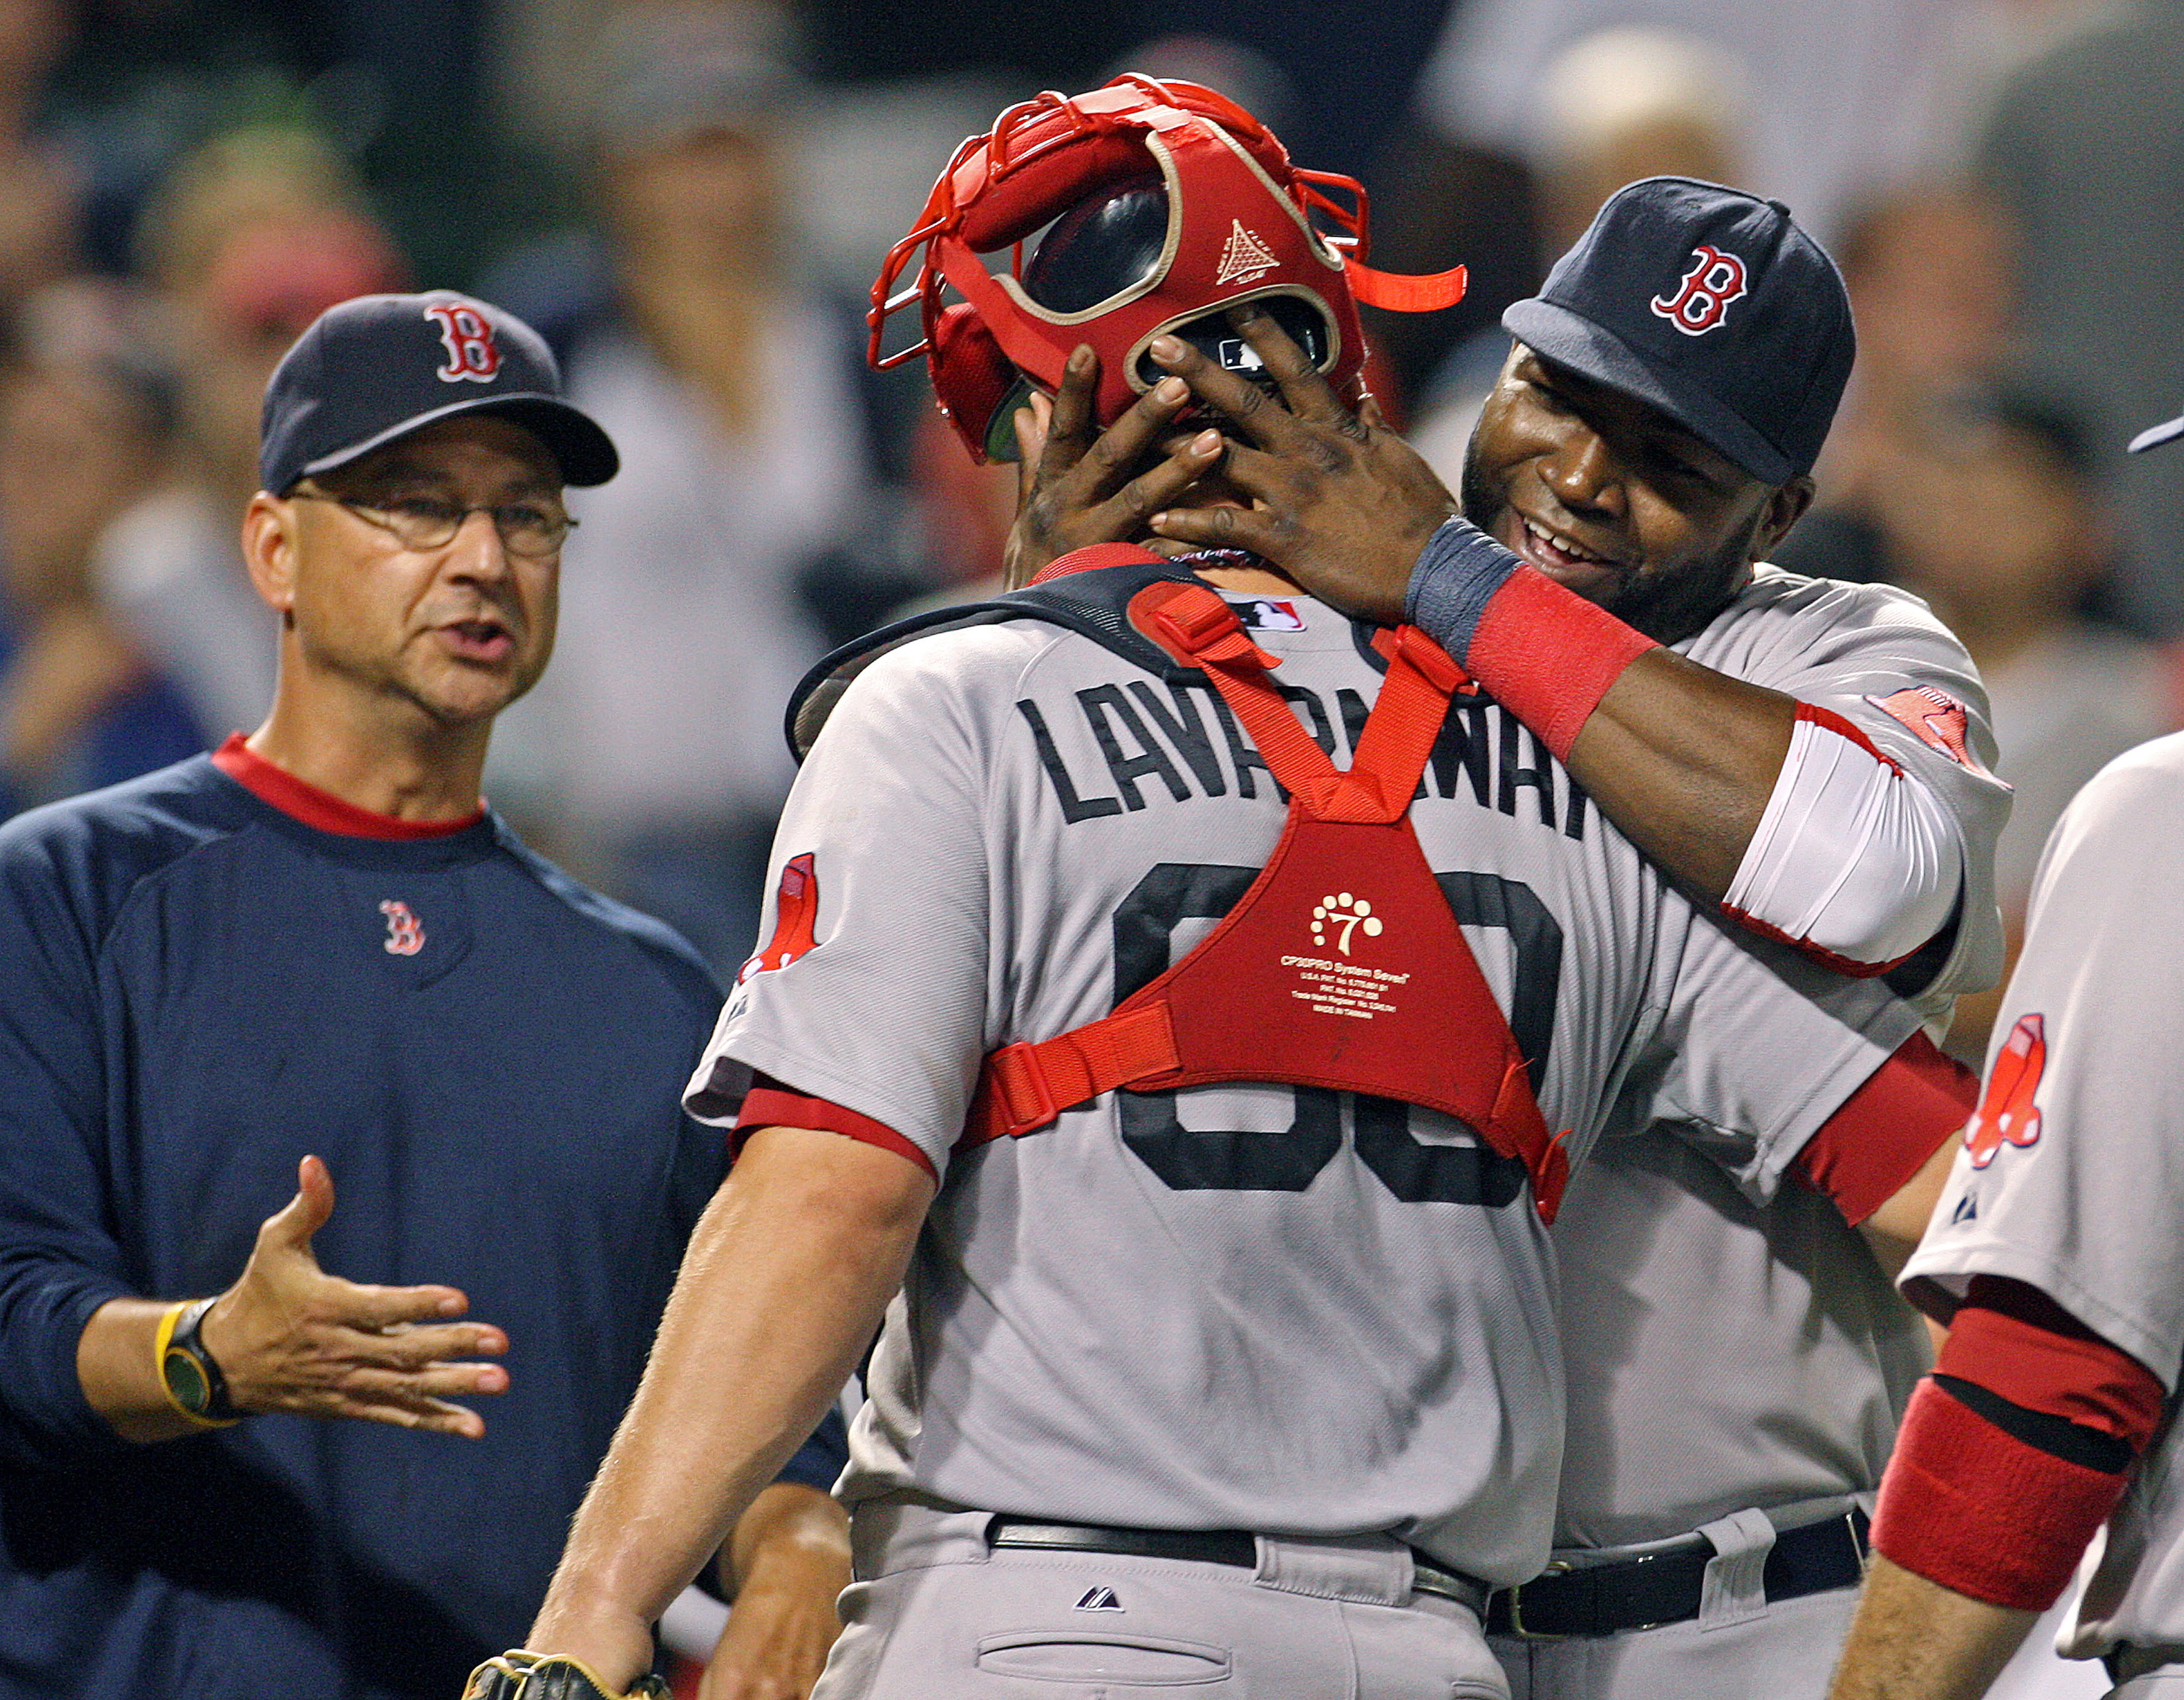 Red Sox catcher Ryan Lavarnway hugs Ortiz (as manager Terry Francona stands nearby) after a rare win Sept. 27. The Sox won just seven times that month.